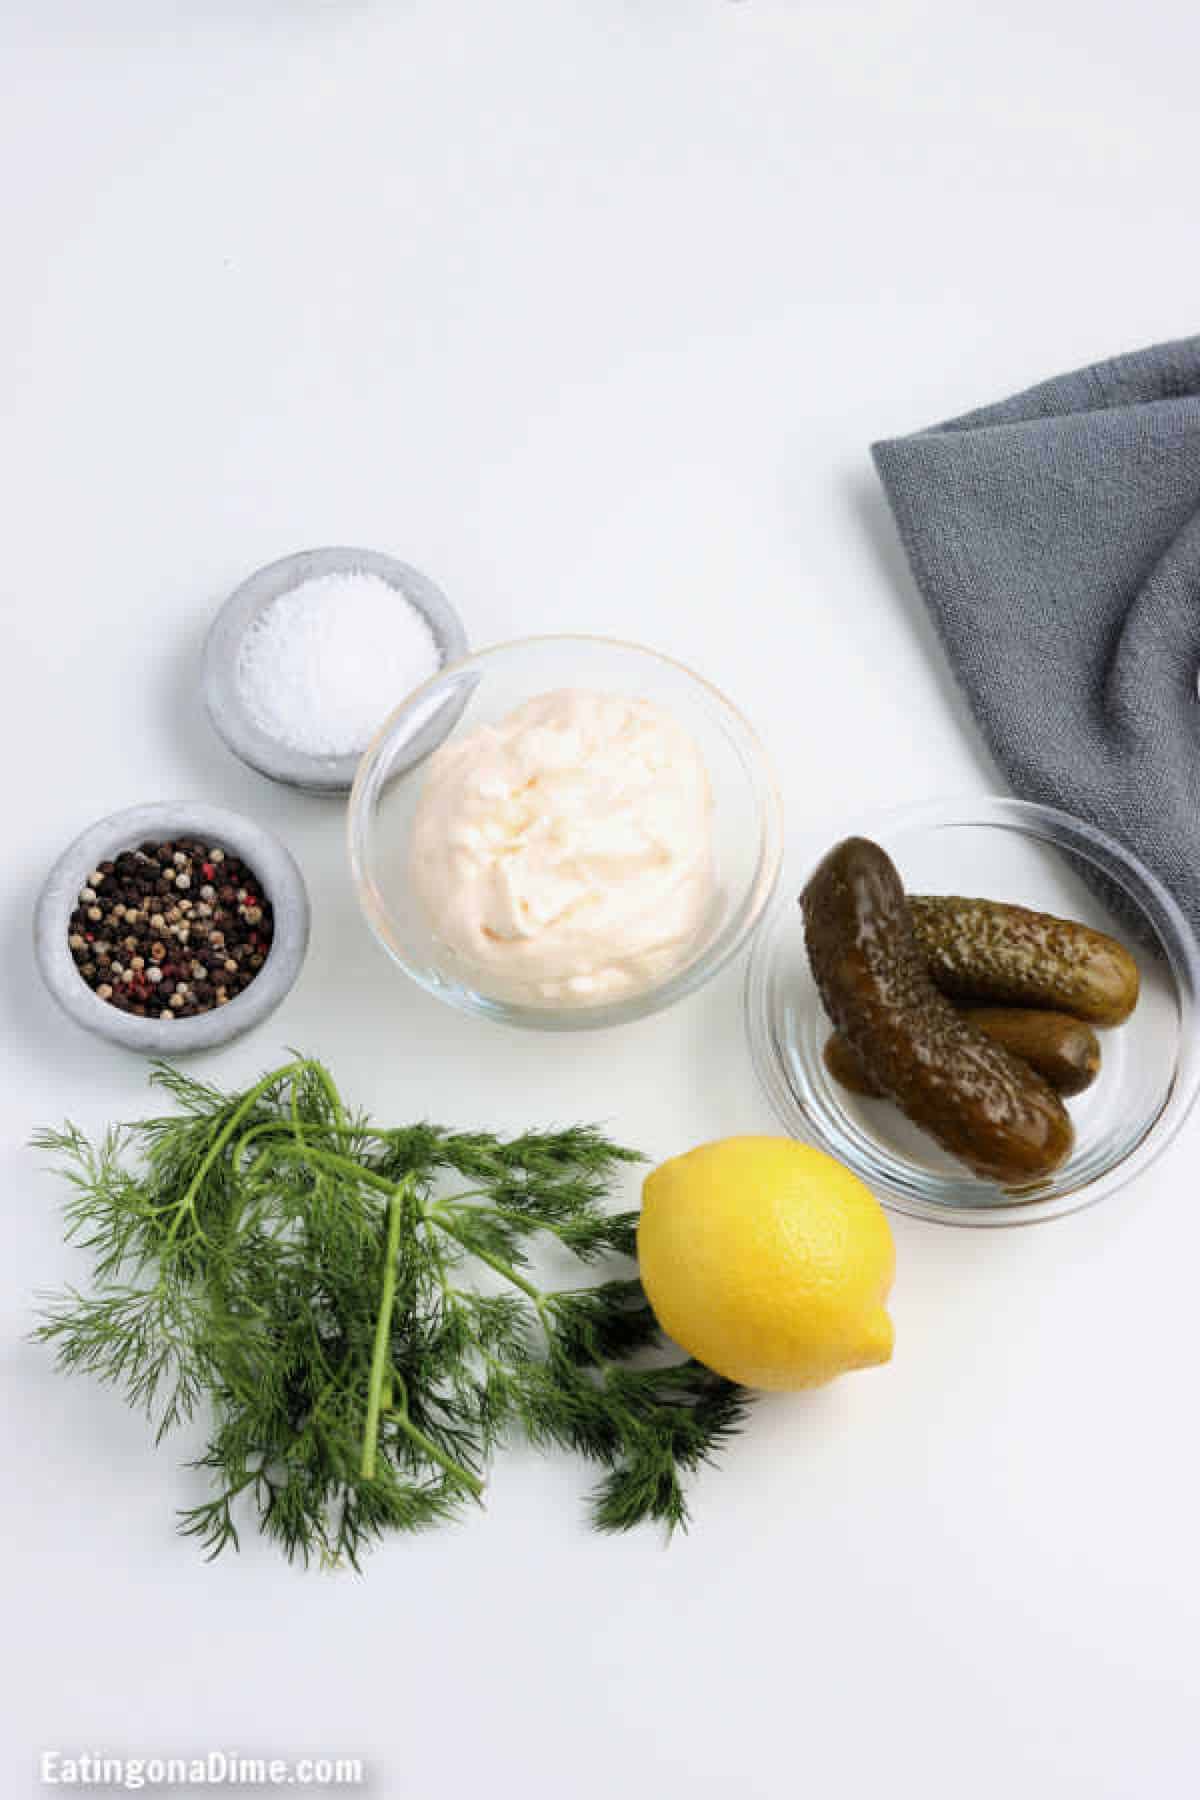 Overview of the ingredients needed to make tartar sauce. - Salt, pepper, mayonnaise, pickles, lemon, fresh dill